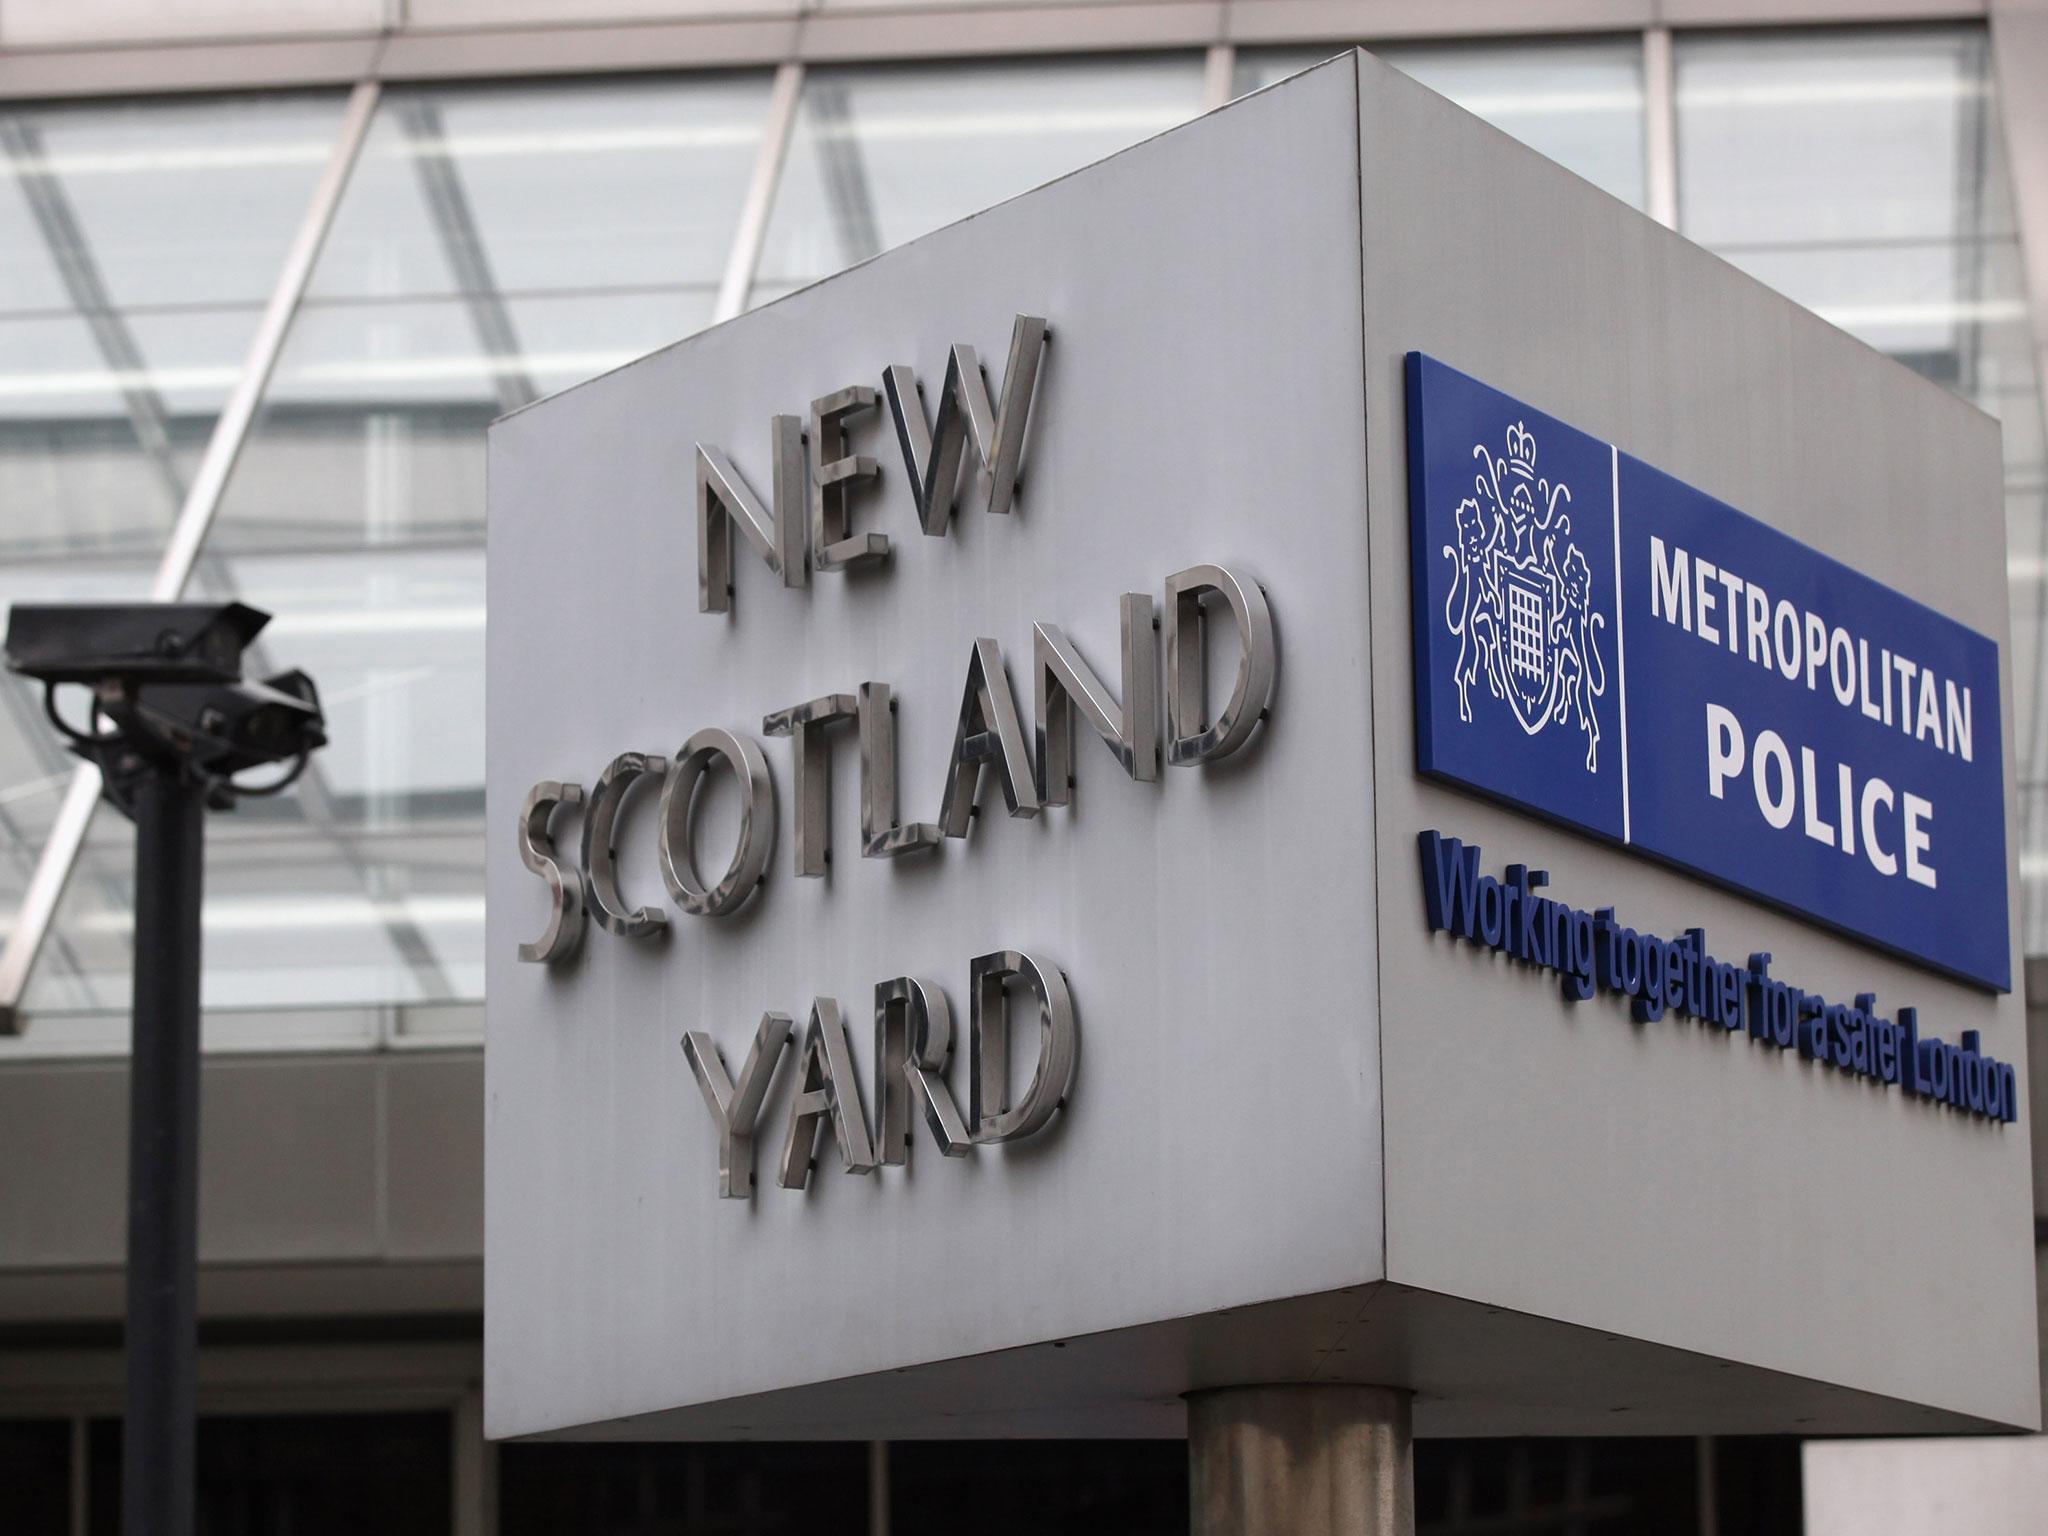 Metropolitan Police officers had been ordered not to destroy any material that could be relevant